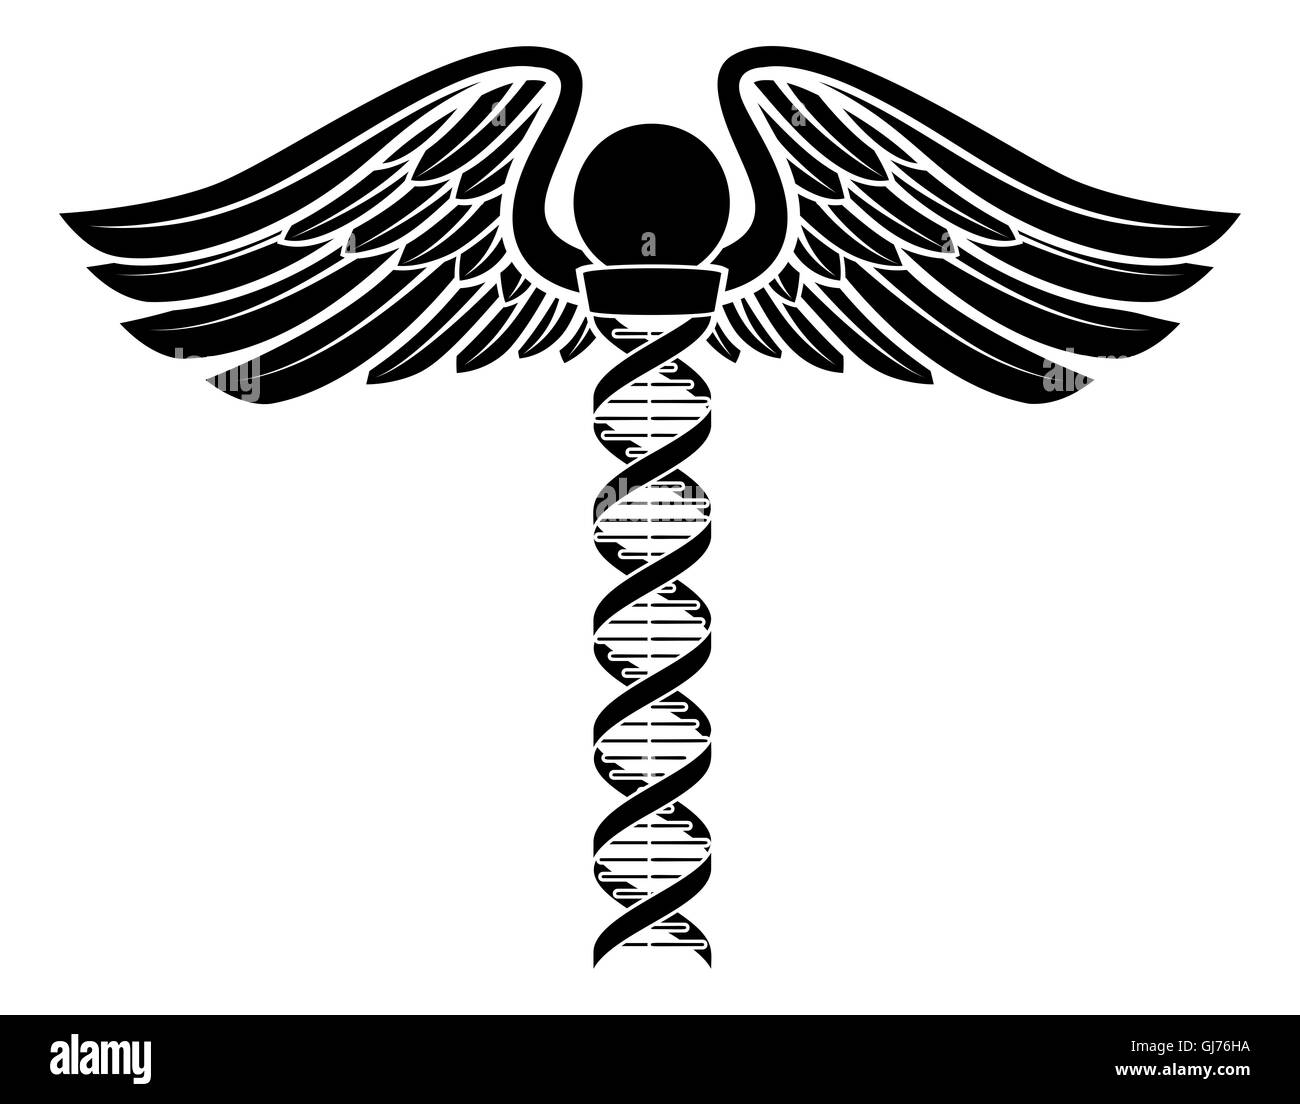 Caduceus medical symbol with a human DNA double helix genetic chromosome strand making up the central rod. Stock Photo